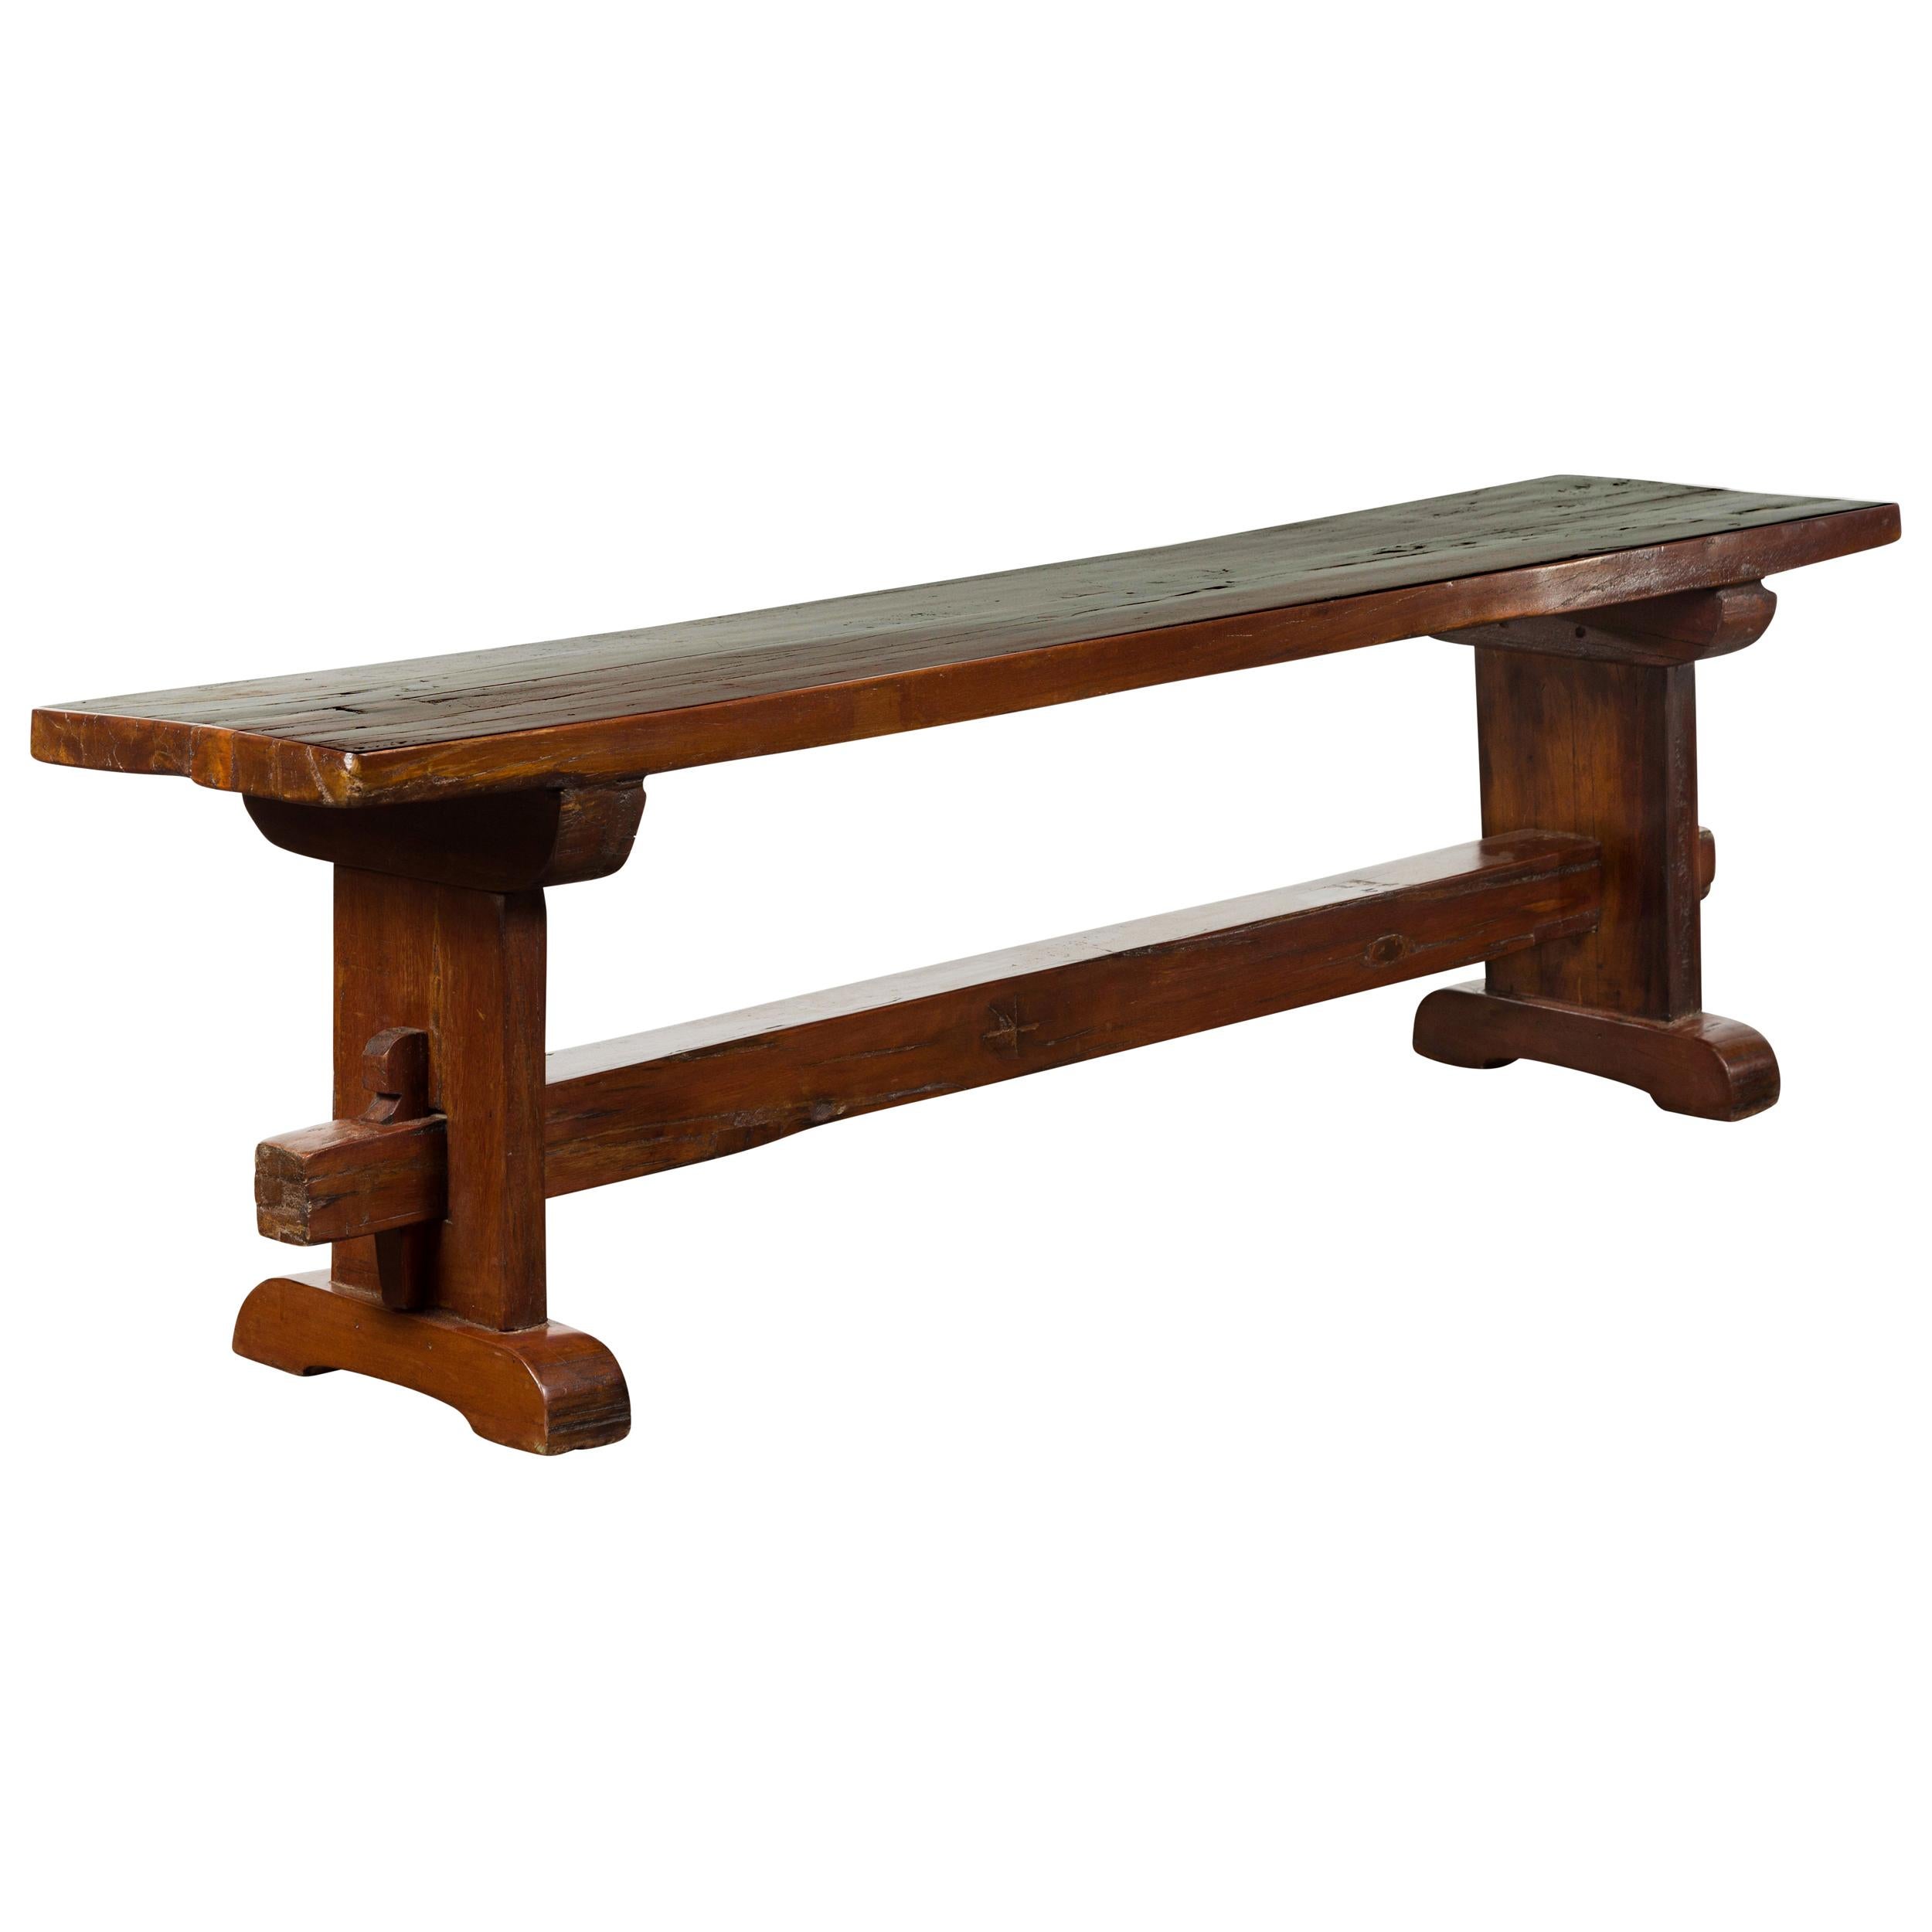 Italian Rustic Walnut Bench with Trestle Base from the Early 19th Century